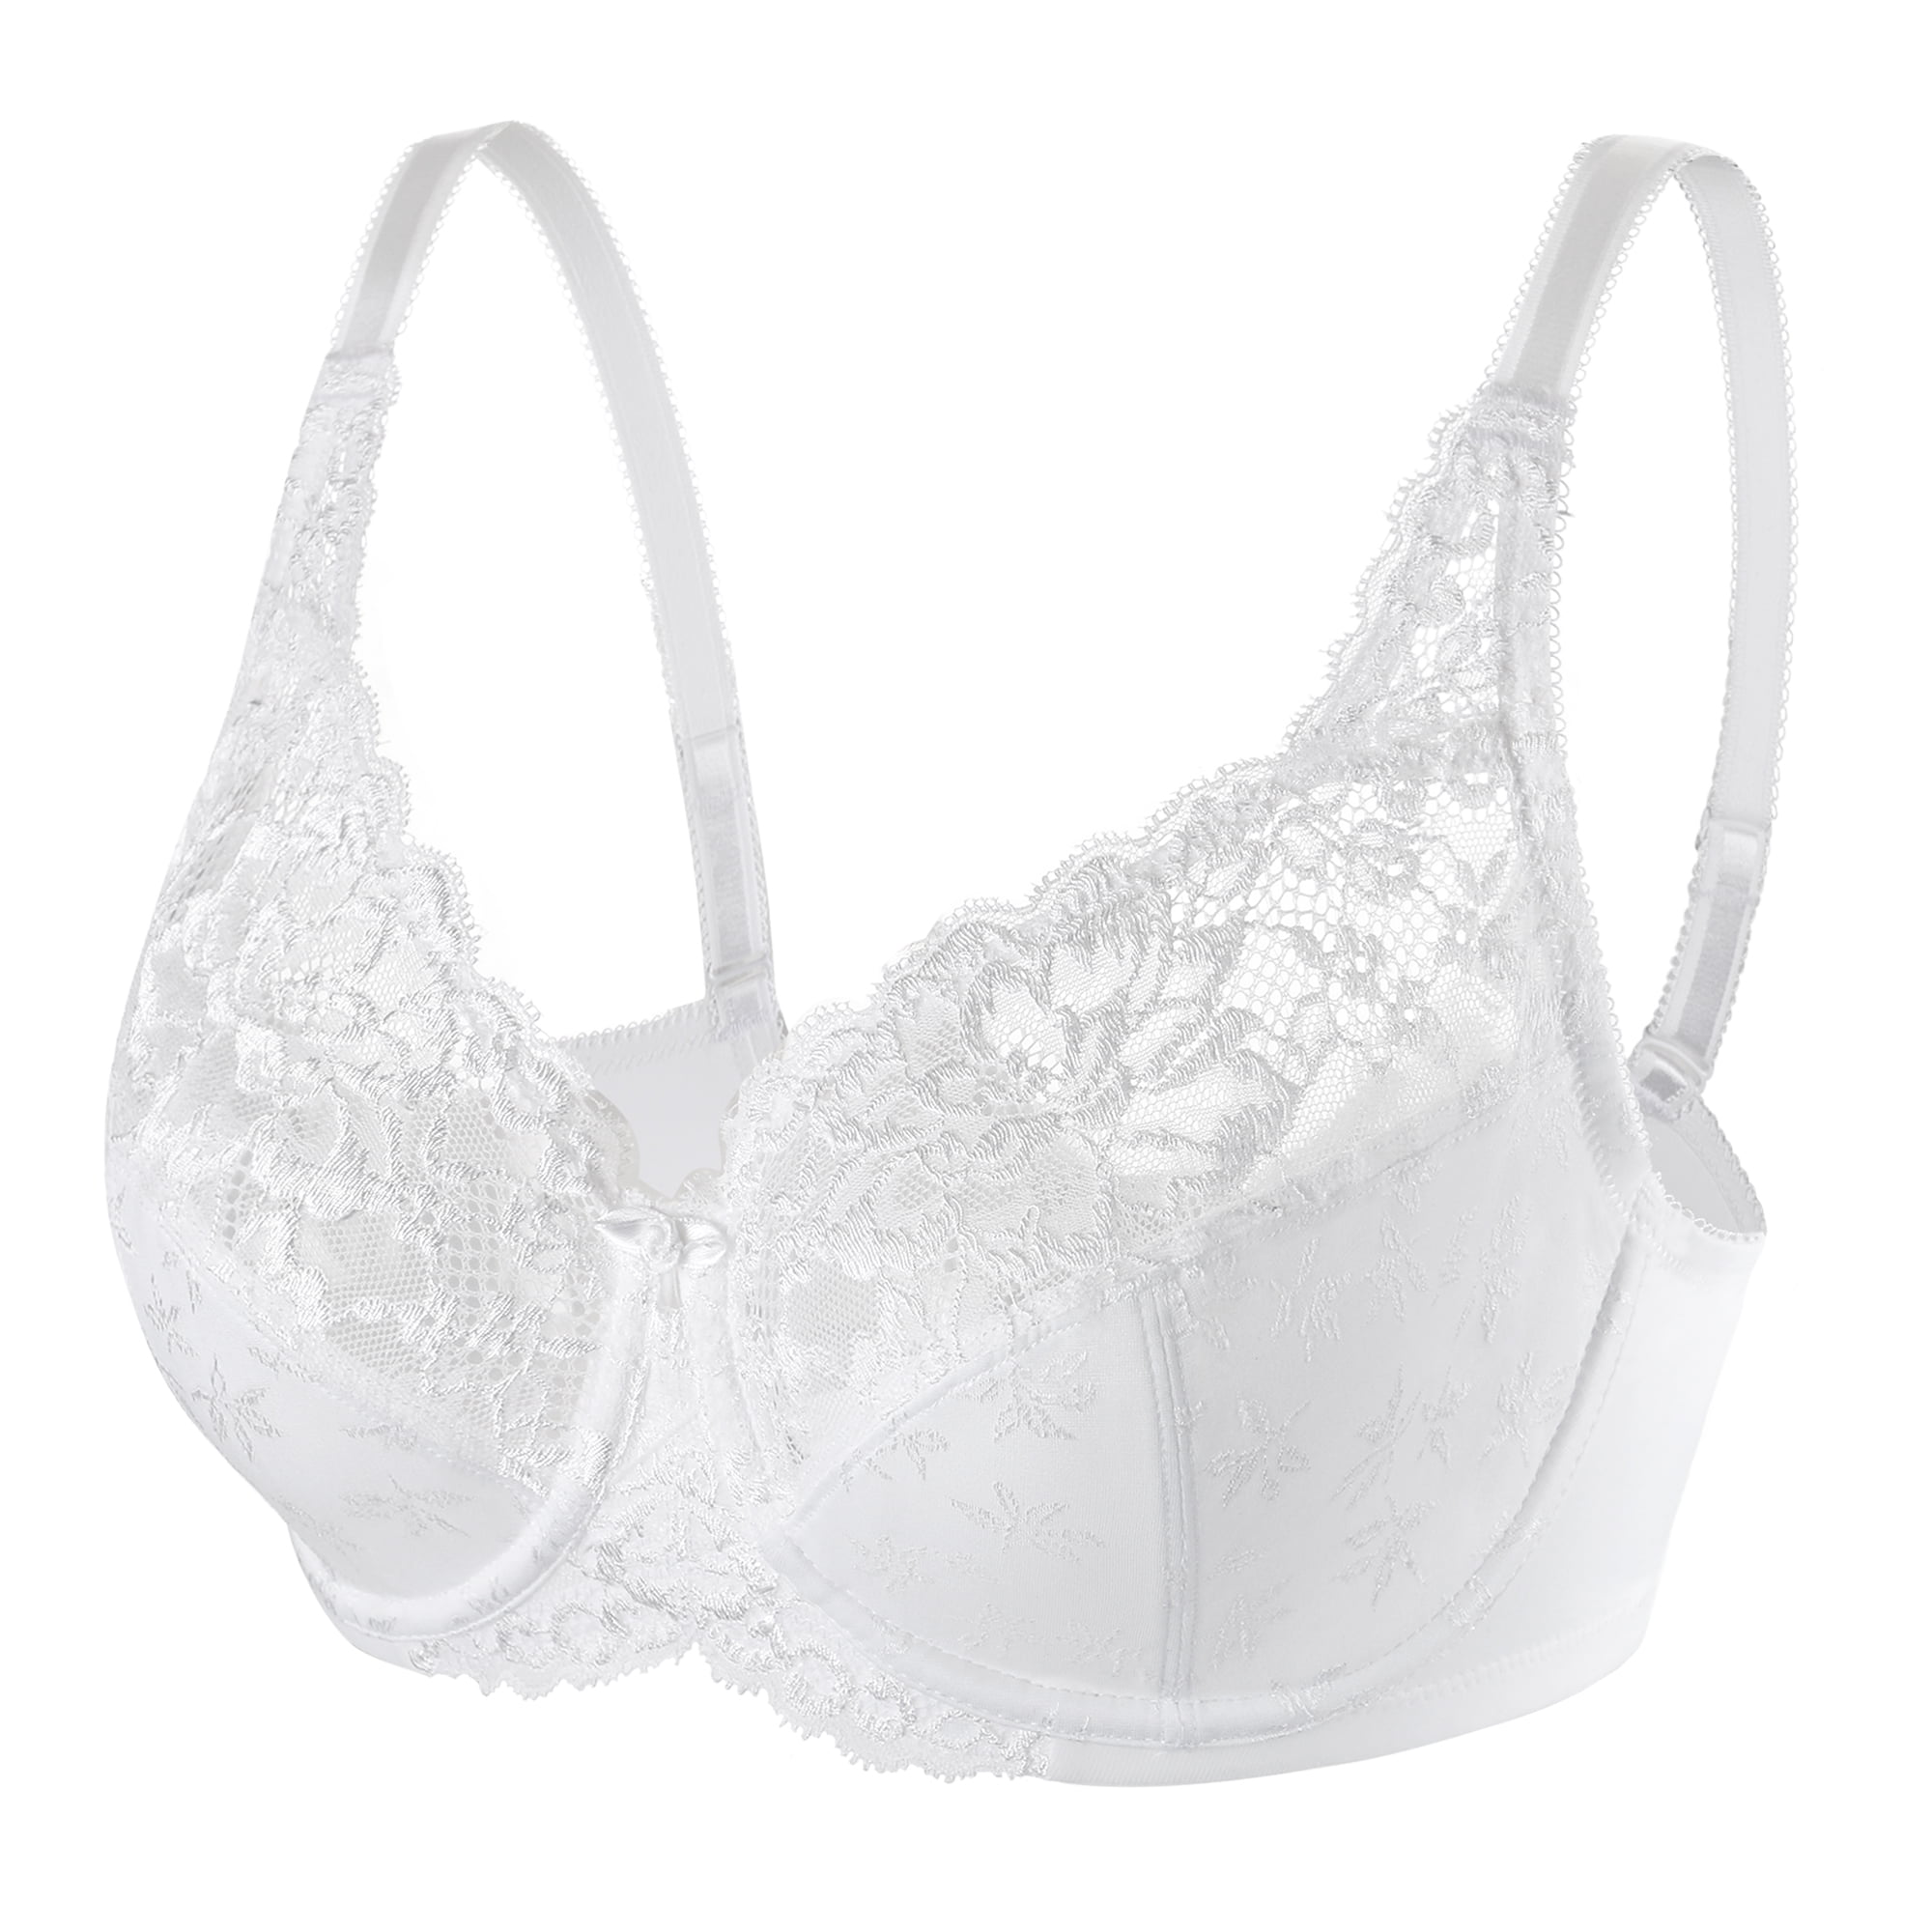 Exclare Women Full Coverage Lace Floral Underwire Bra-59